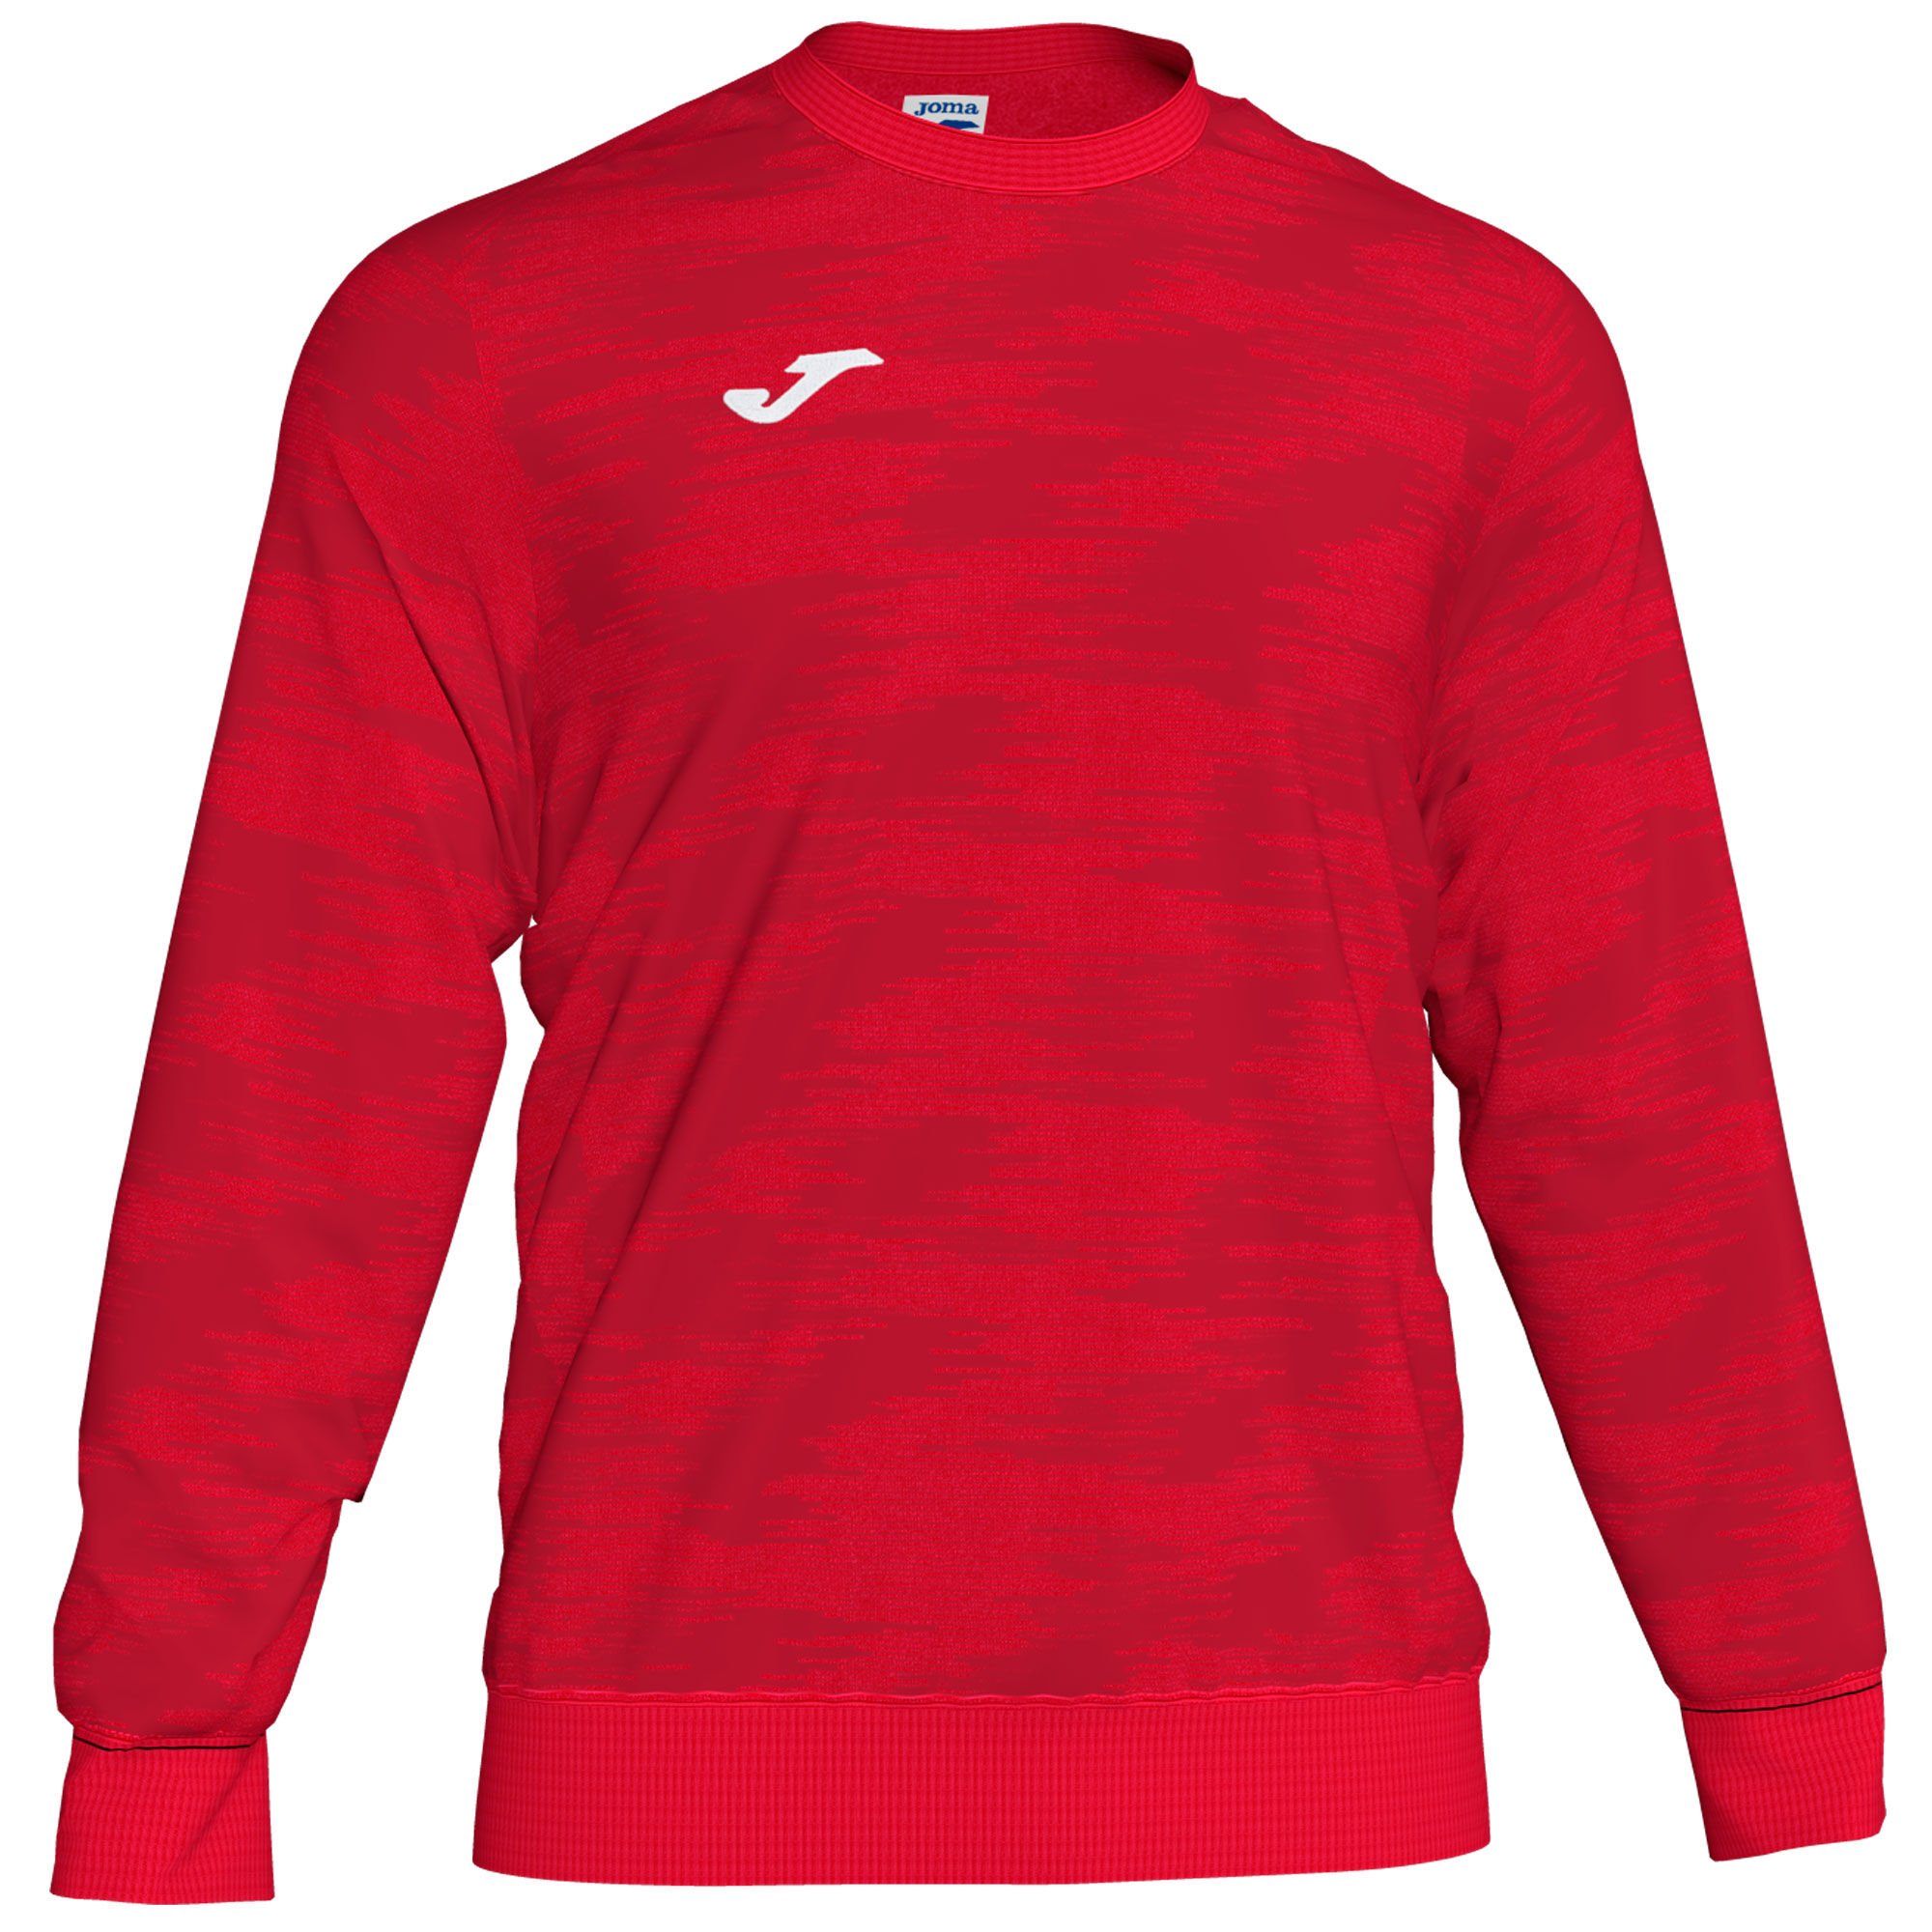 SWEAT-SHIRT HOMME GRAFITY ROUGE